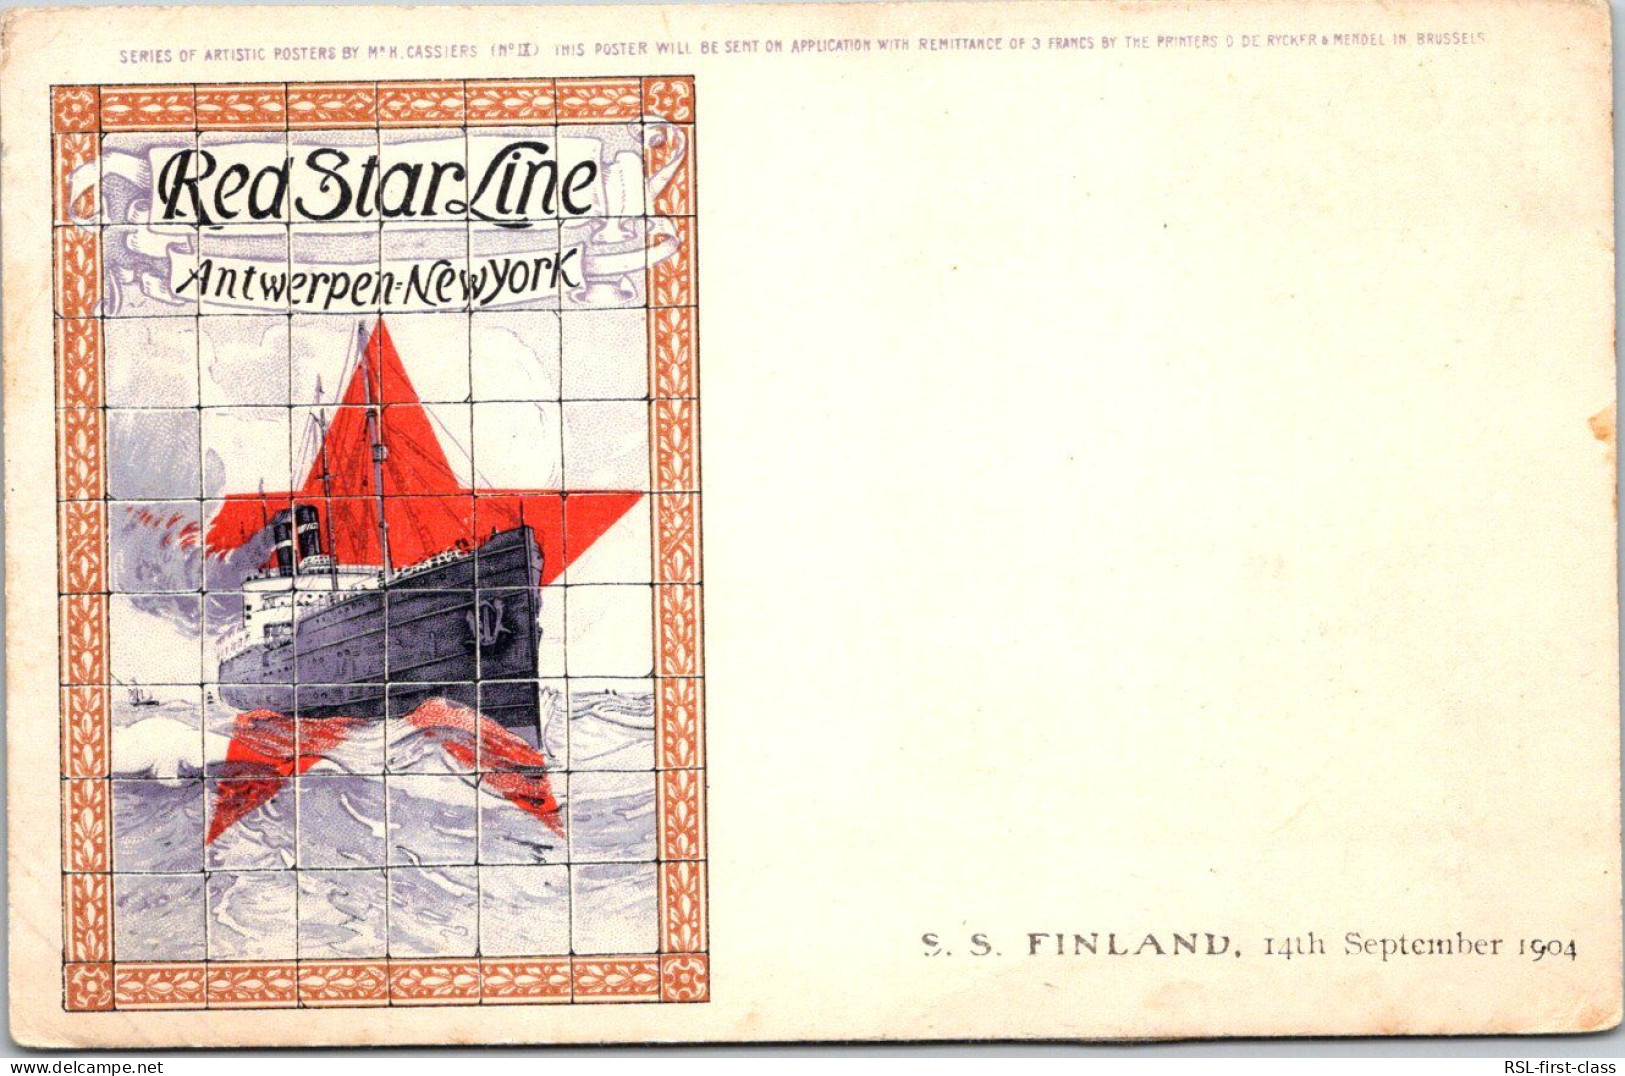 RED STAR LINE : Special Card C-6s From Serie C : Poster Designs, By H. Cassiers - Rrrarissimes - Paquebote